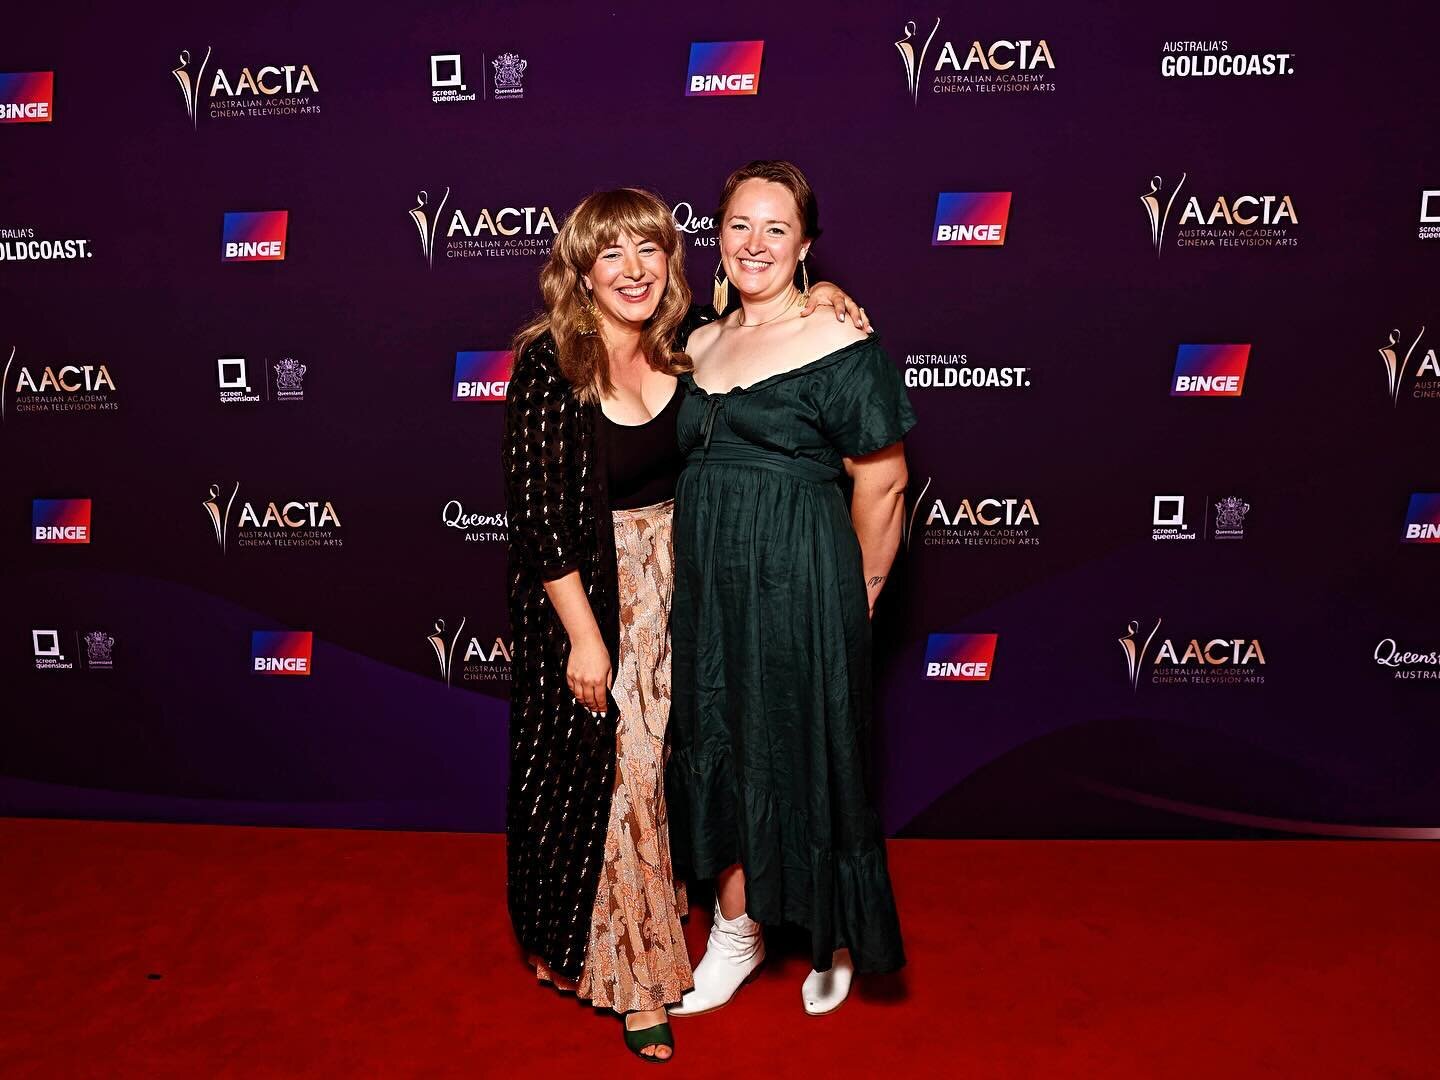 Slow to the posting party but the aactas were a hoot and a half! 🦉🦉🦉🦉🦉
And for those playing at home - 1. yes dears, of course I wore a wig as per my Moira-esque stylings to these events with many a people saying they have still no idea what my 